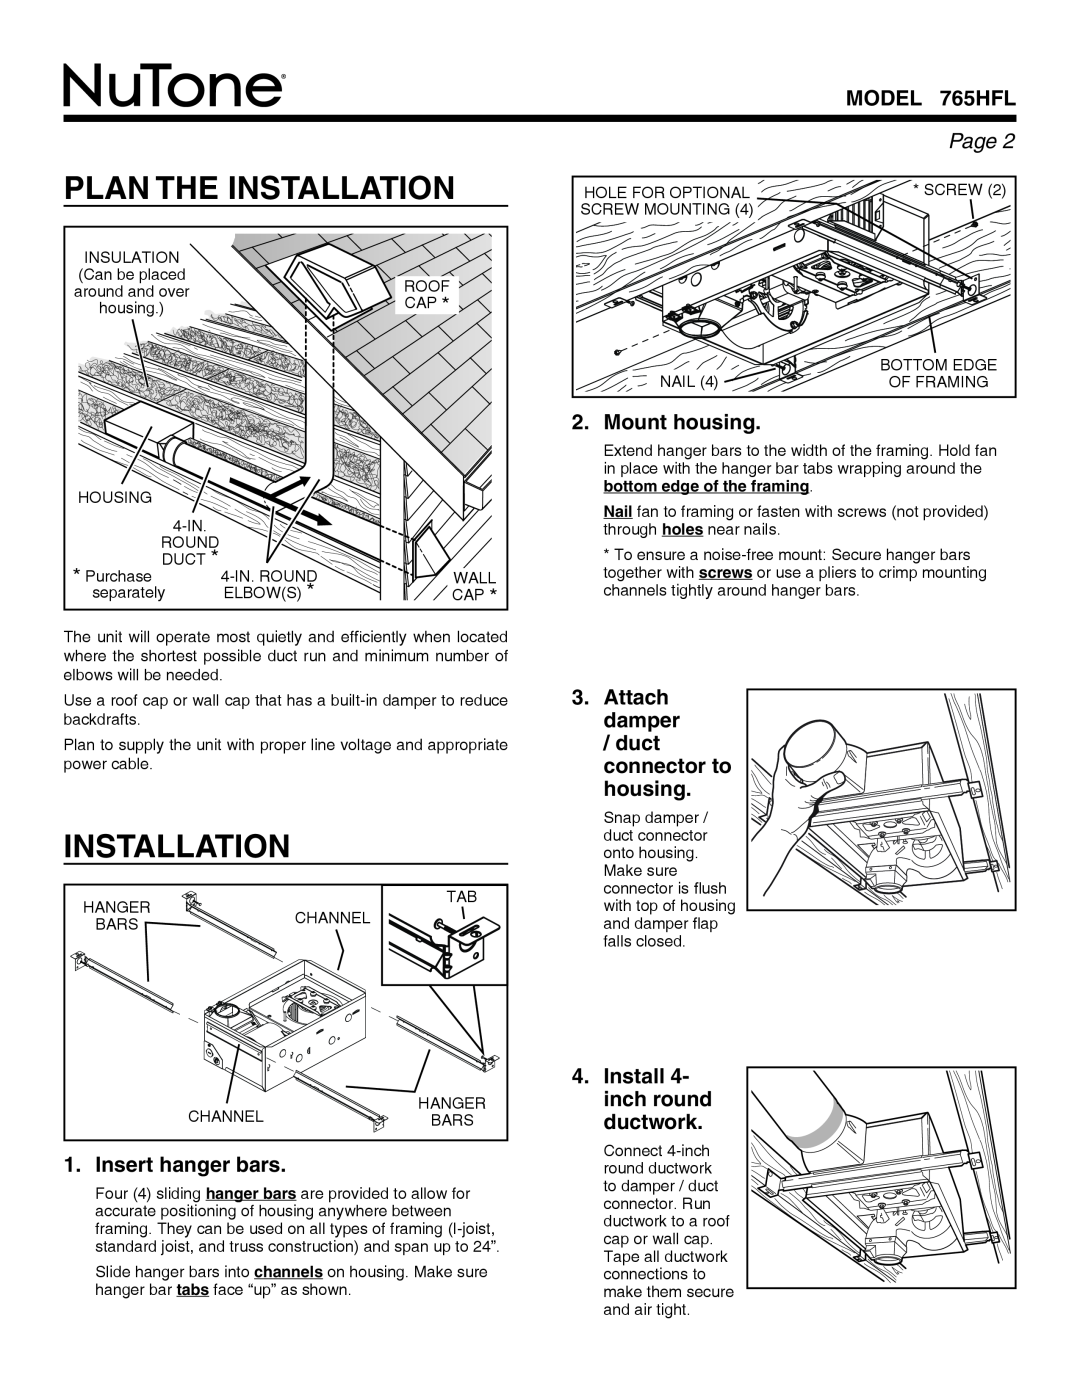 NuTone 765HFL Plan The Installation, Model, Page, Mount housing, Insert hanger bars, Install 4- inch round ductwork 